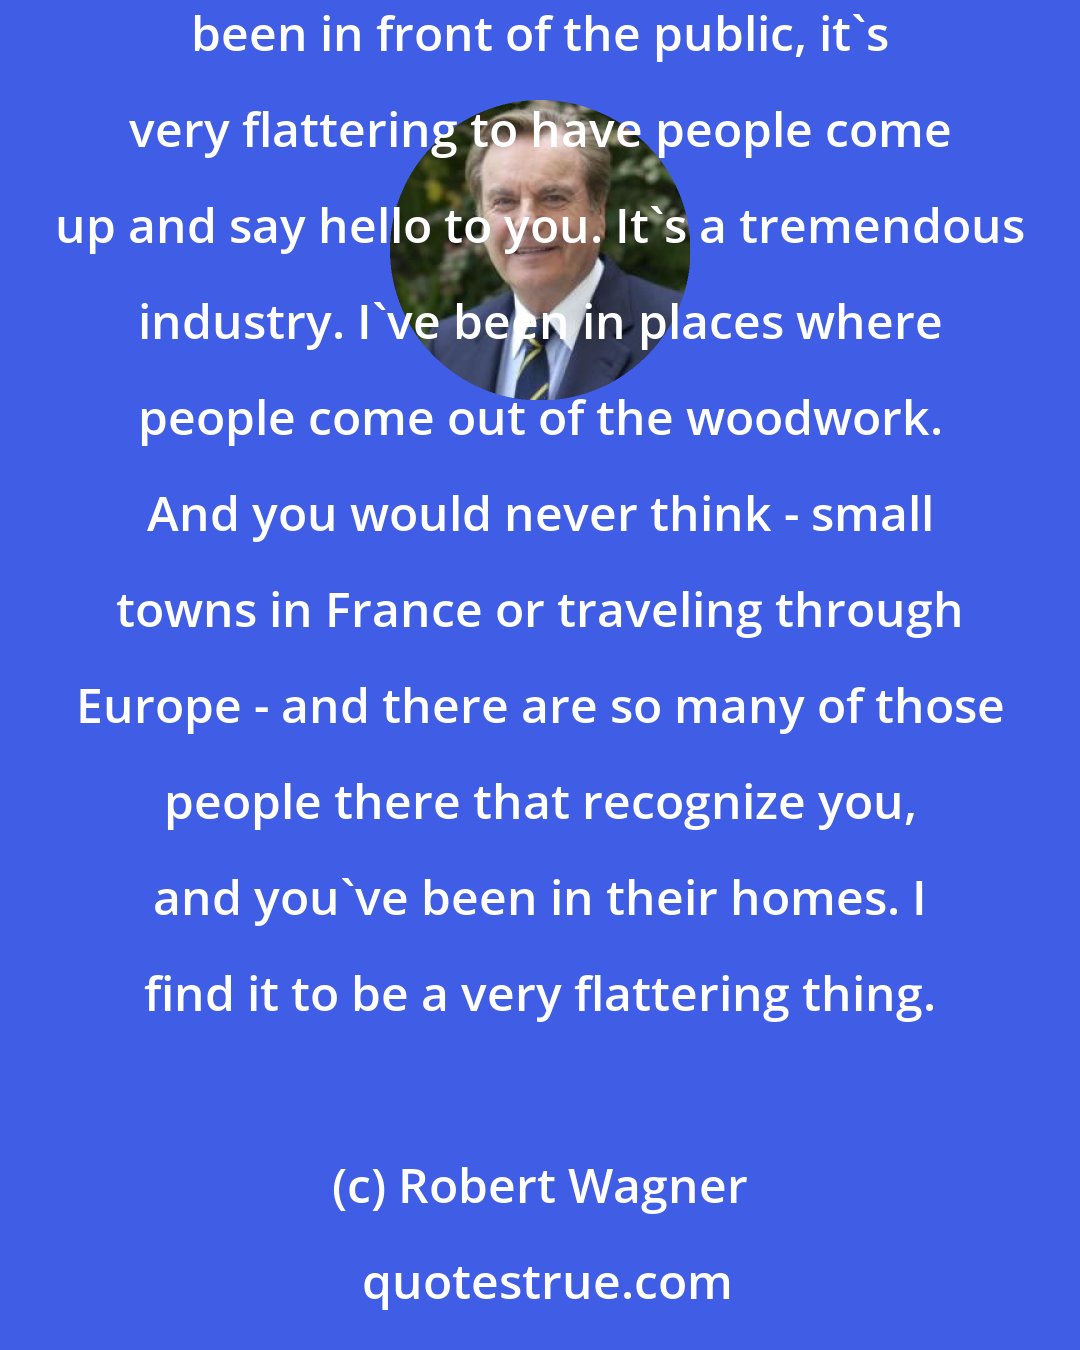 Robert Wagner: Television is just amazing - how many people see it and how many people recognize you, and I think once you've had the opportunity and have been in front of the public, it's very flattering to have people come up and say hello to you. It's a tremendous industry. I've been in places where people come out of the woodwork. And you would never think - small towns in France or traveling through Europe - and there are so many of those people there that recognize you, and you've been in their homes. I find it to be a very flattering thing.